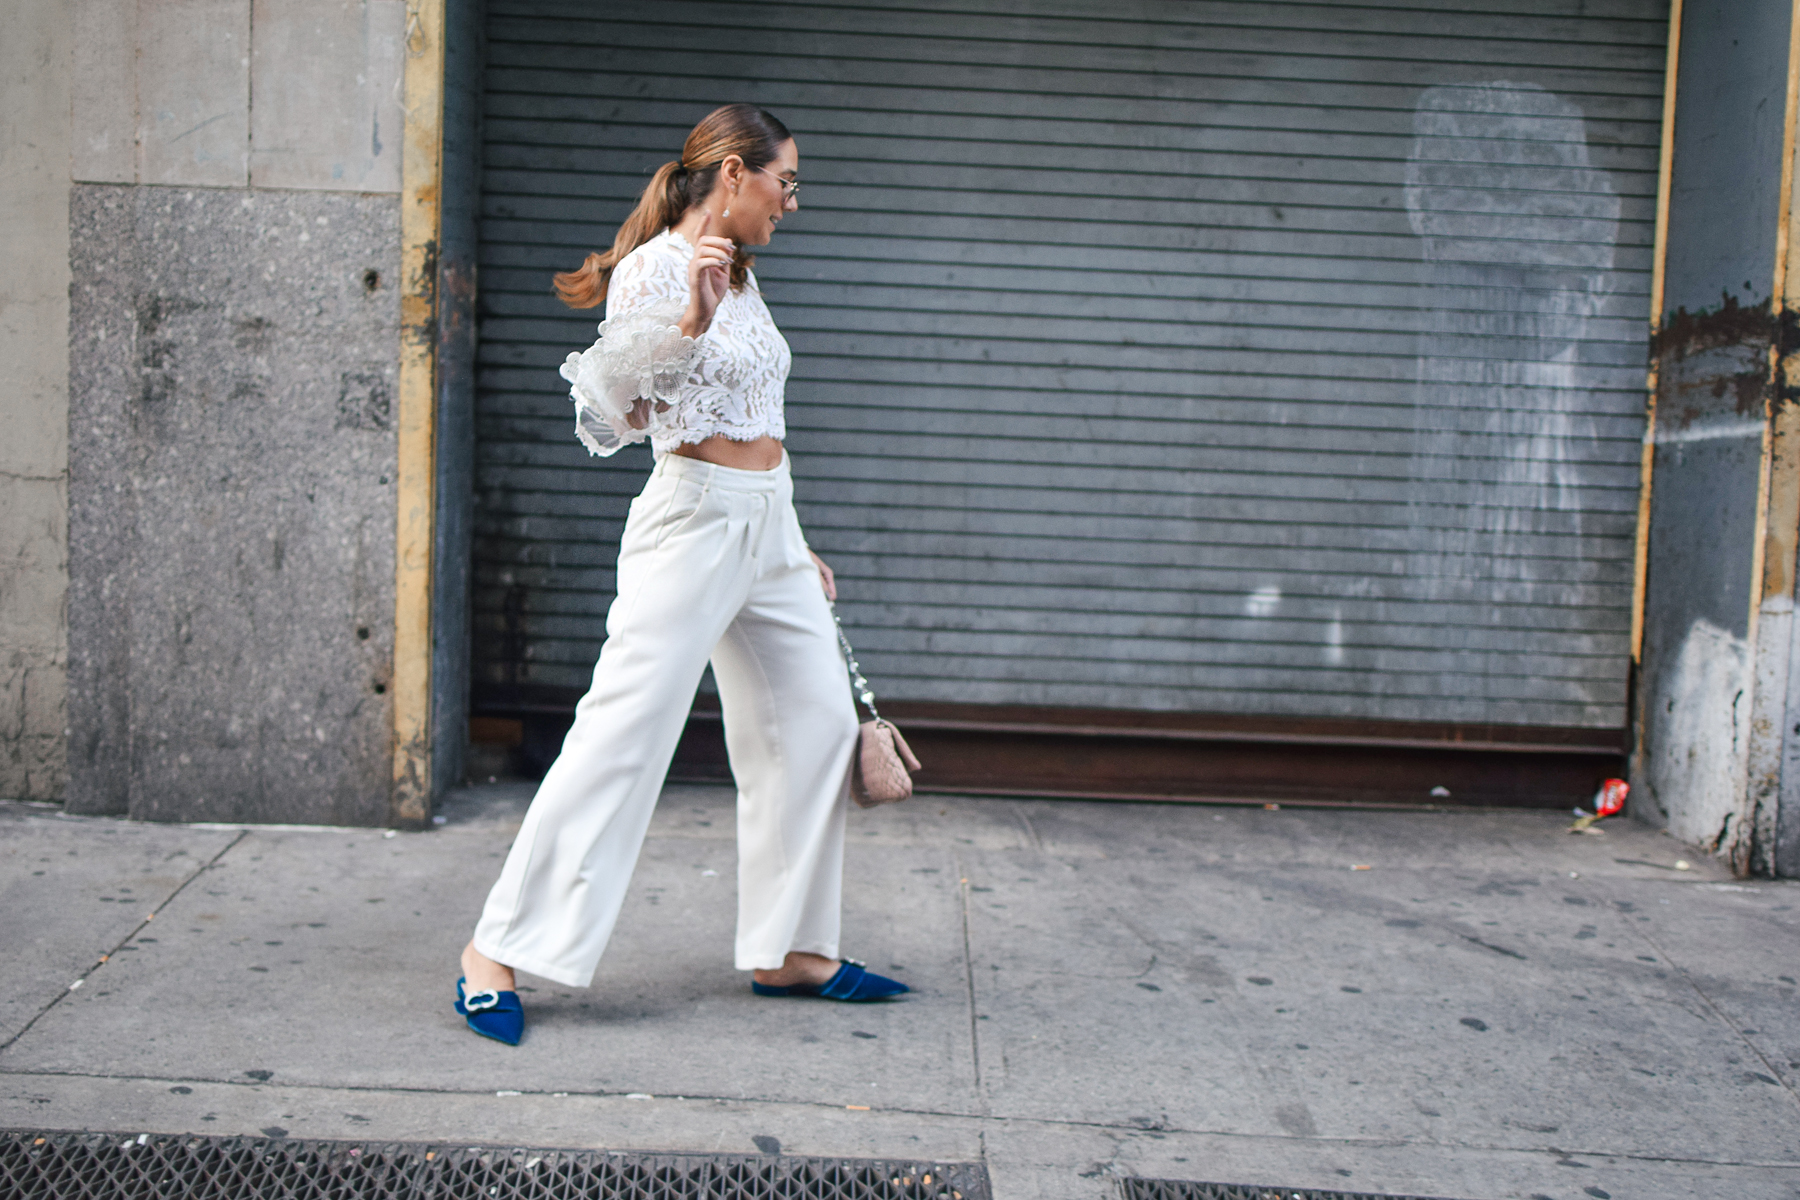 nyfw-streetstyle-outfit-lace-ruffle-statement-bell-sleeve-blouse-white-trousers-all-white-prada-royal-blue-slides-blush-accessories-candid-shot